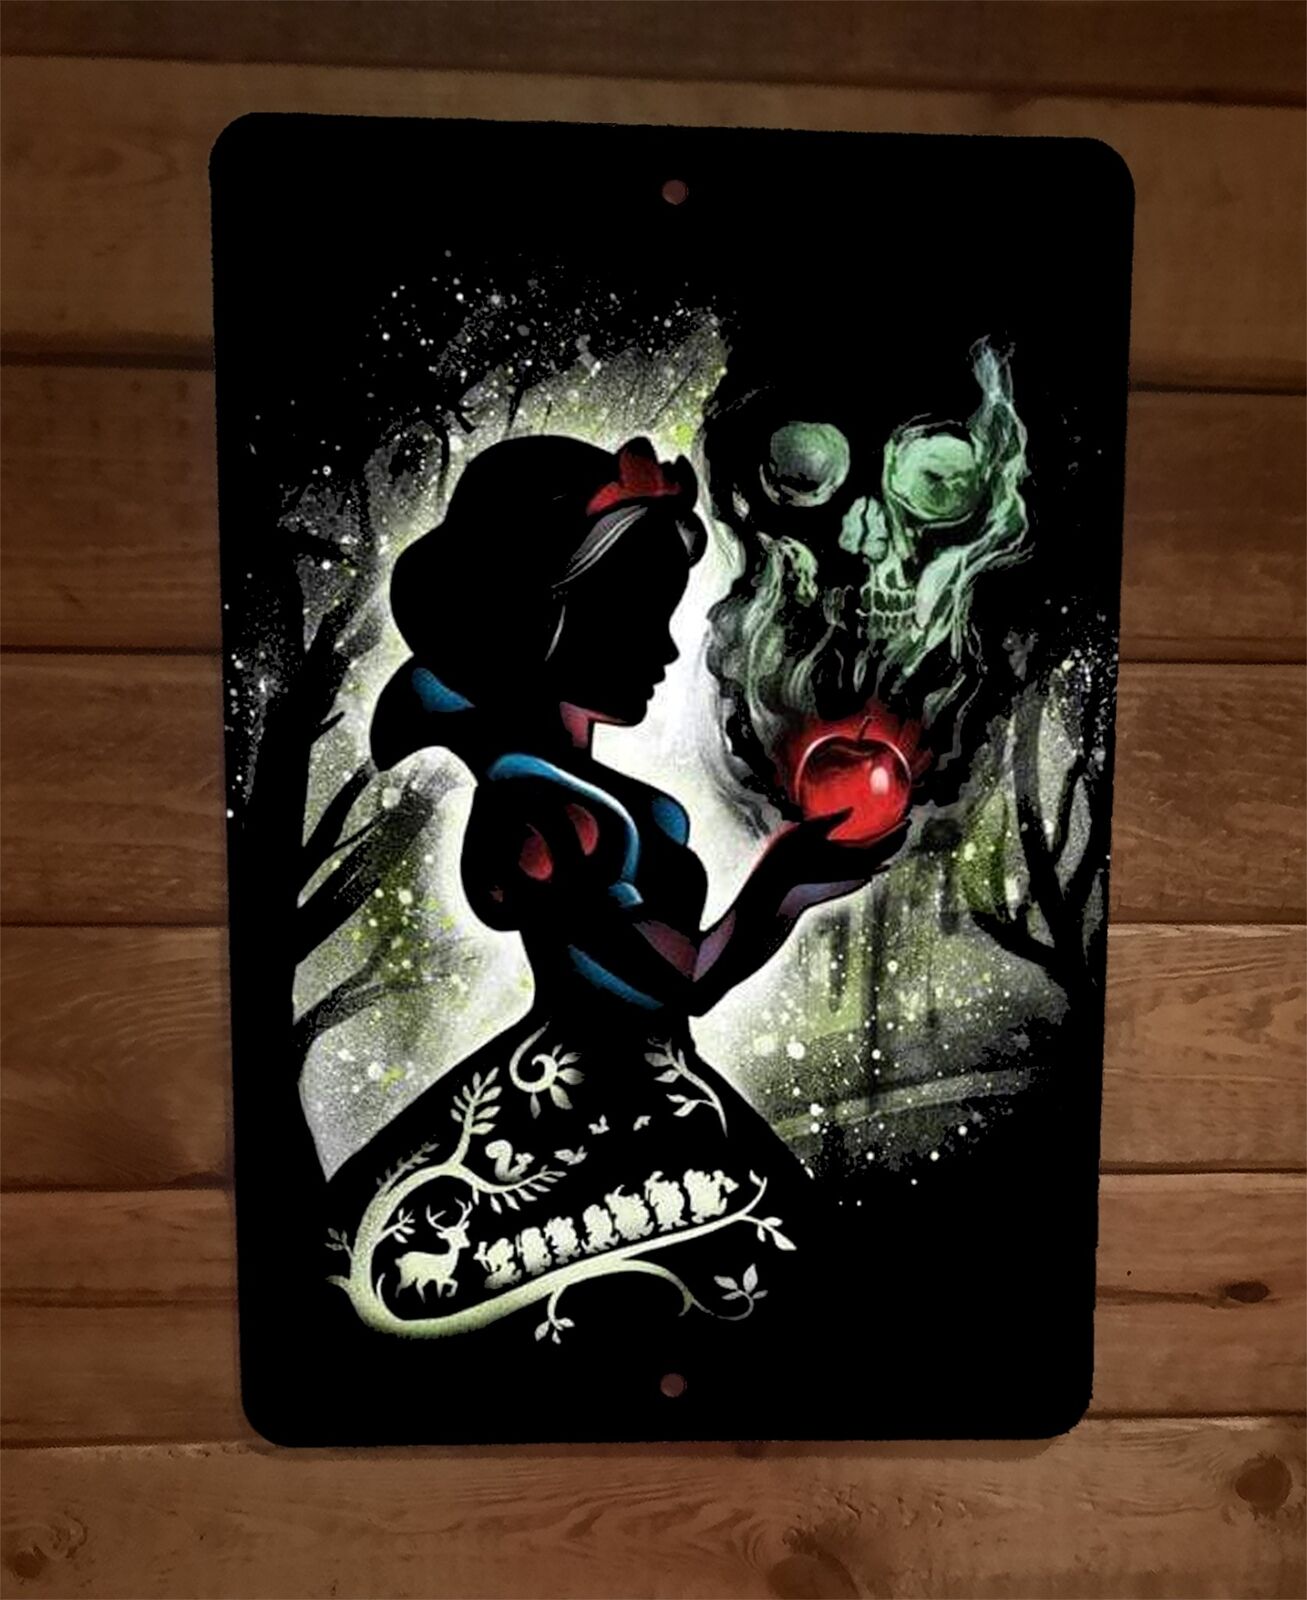 The Poisoned Apple Snow White 8x12 Metal Wall Sign